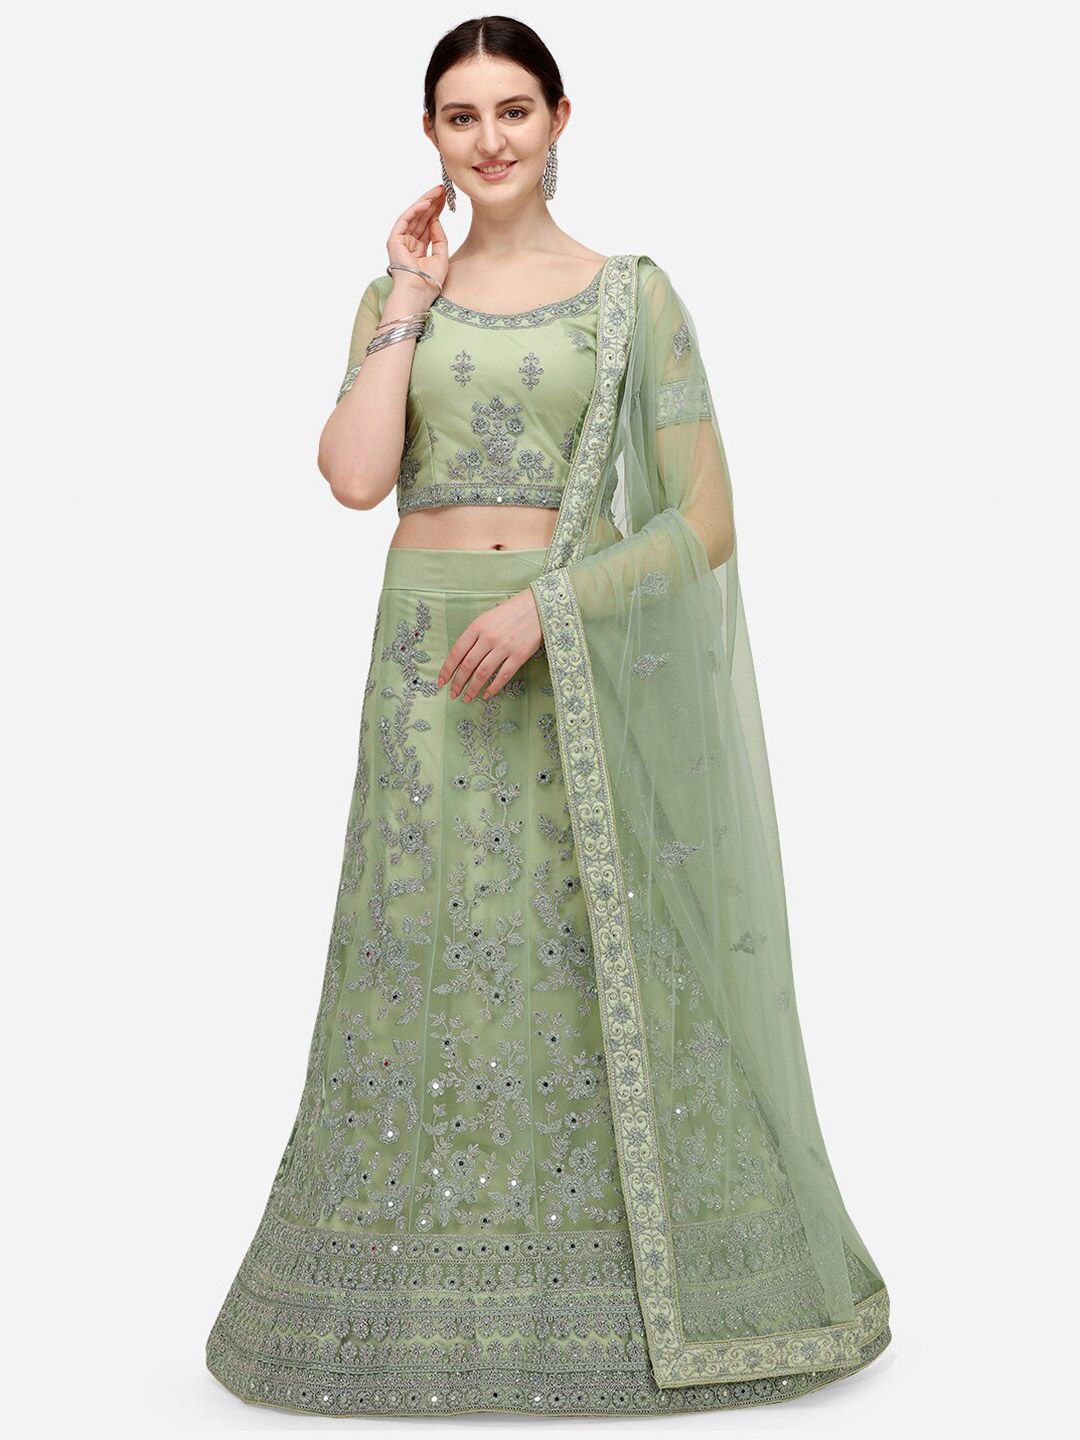 Netram Lime Green & Silver-Toned Embroidered Mirror Work Semi-Stitched Lehenga & Unstitched Blouse With Price in India